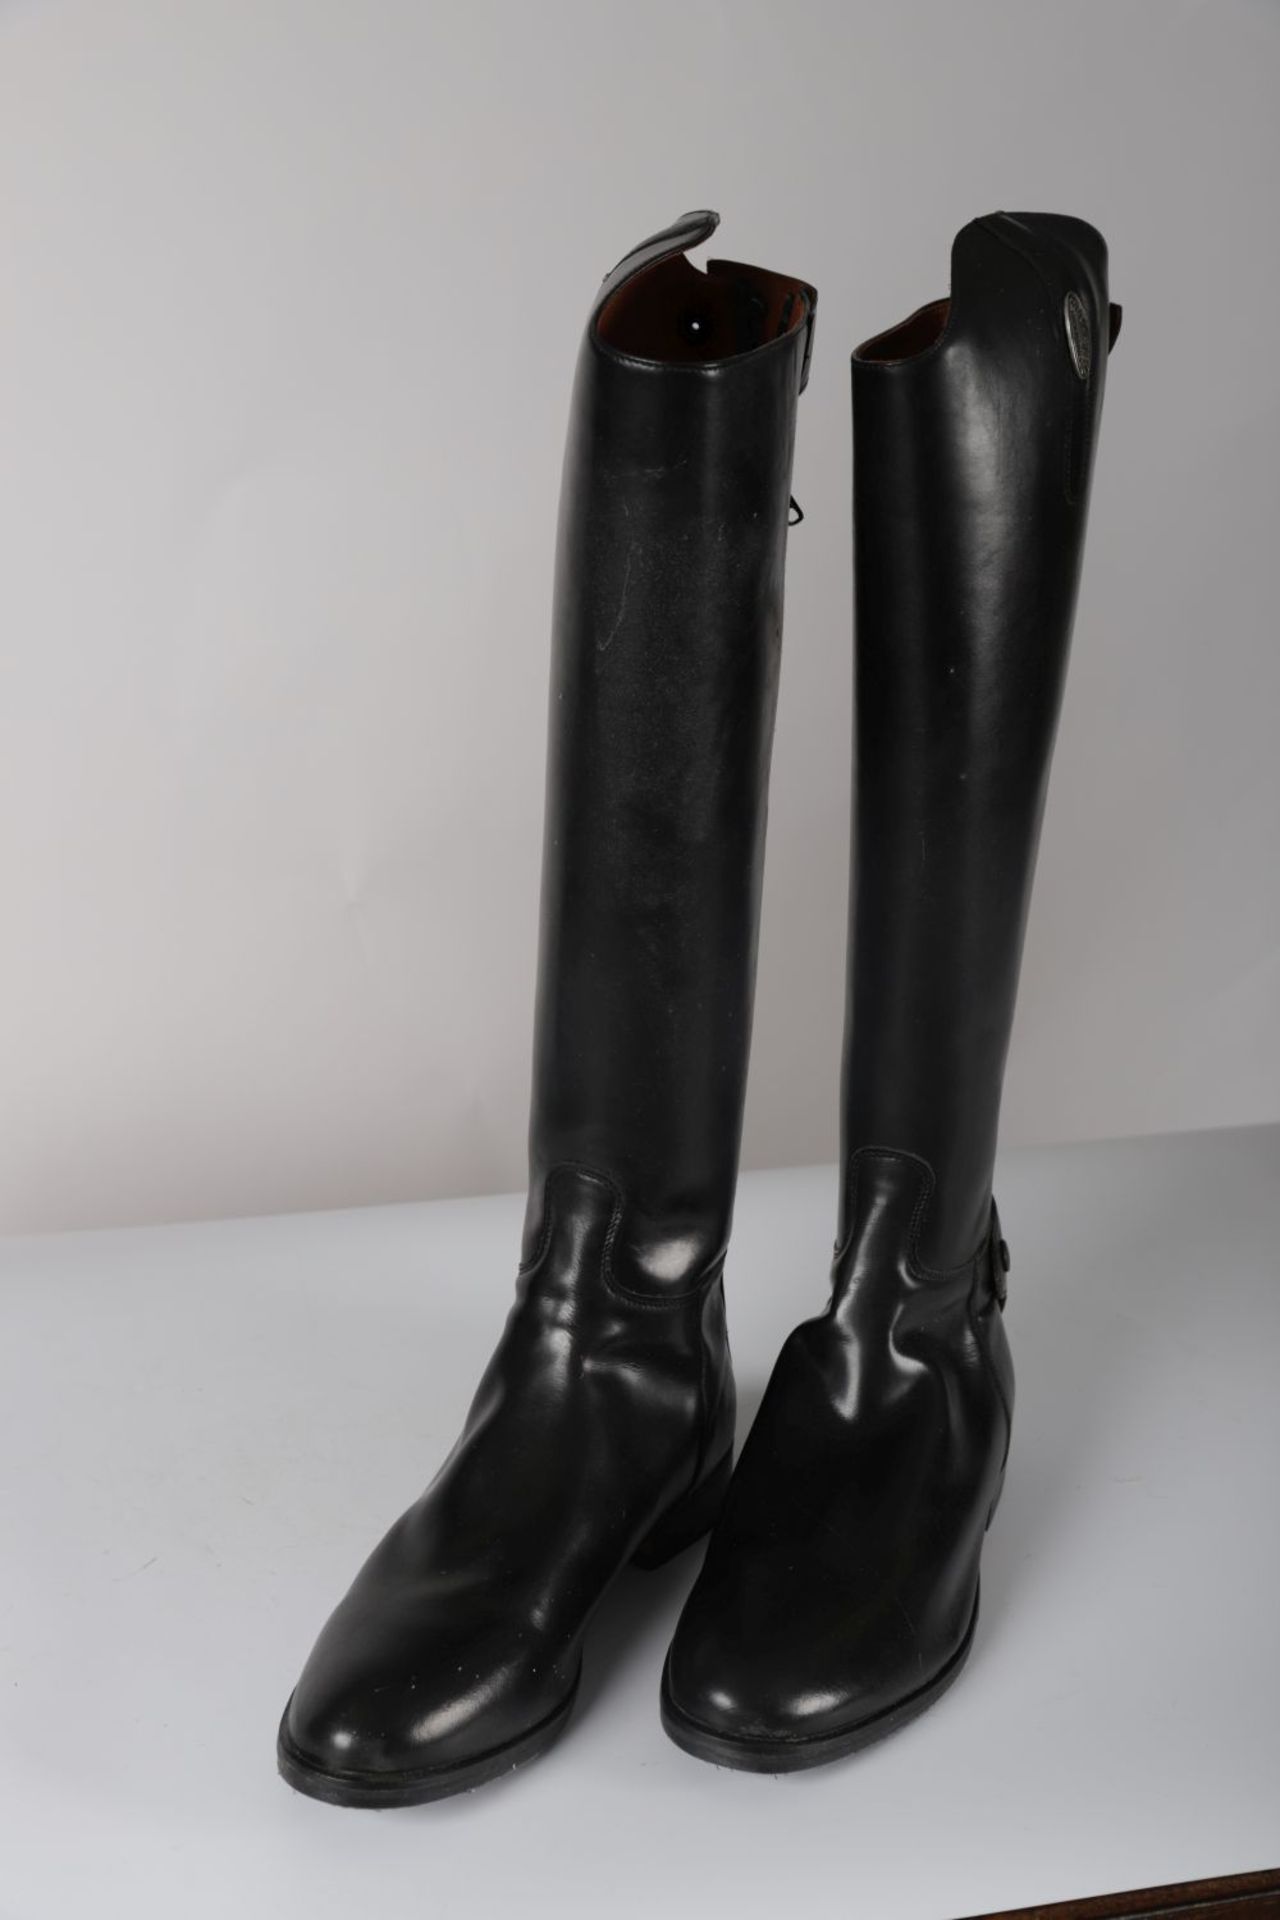 PAIR FELLINI RIDING BOOTS - Image 3 of 3